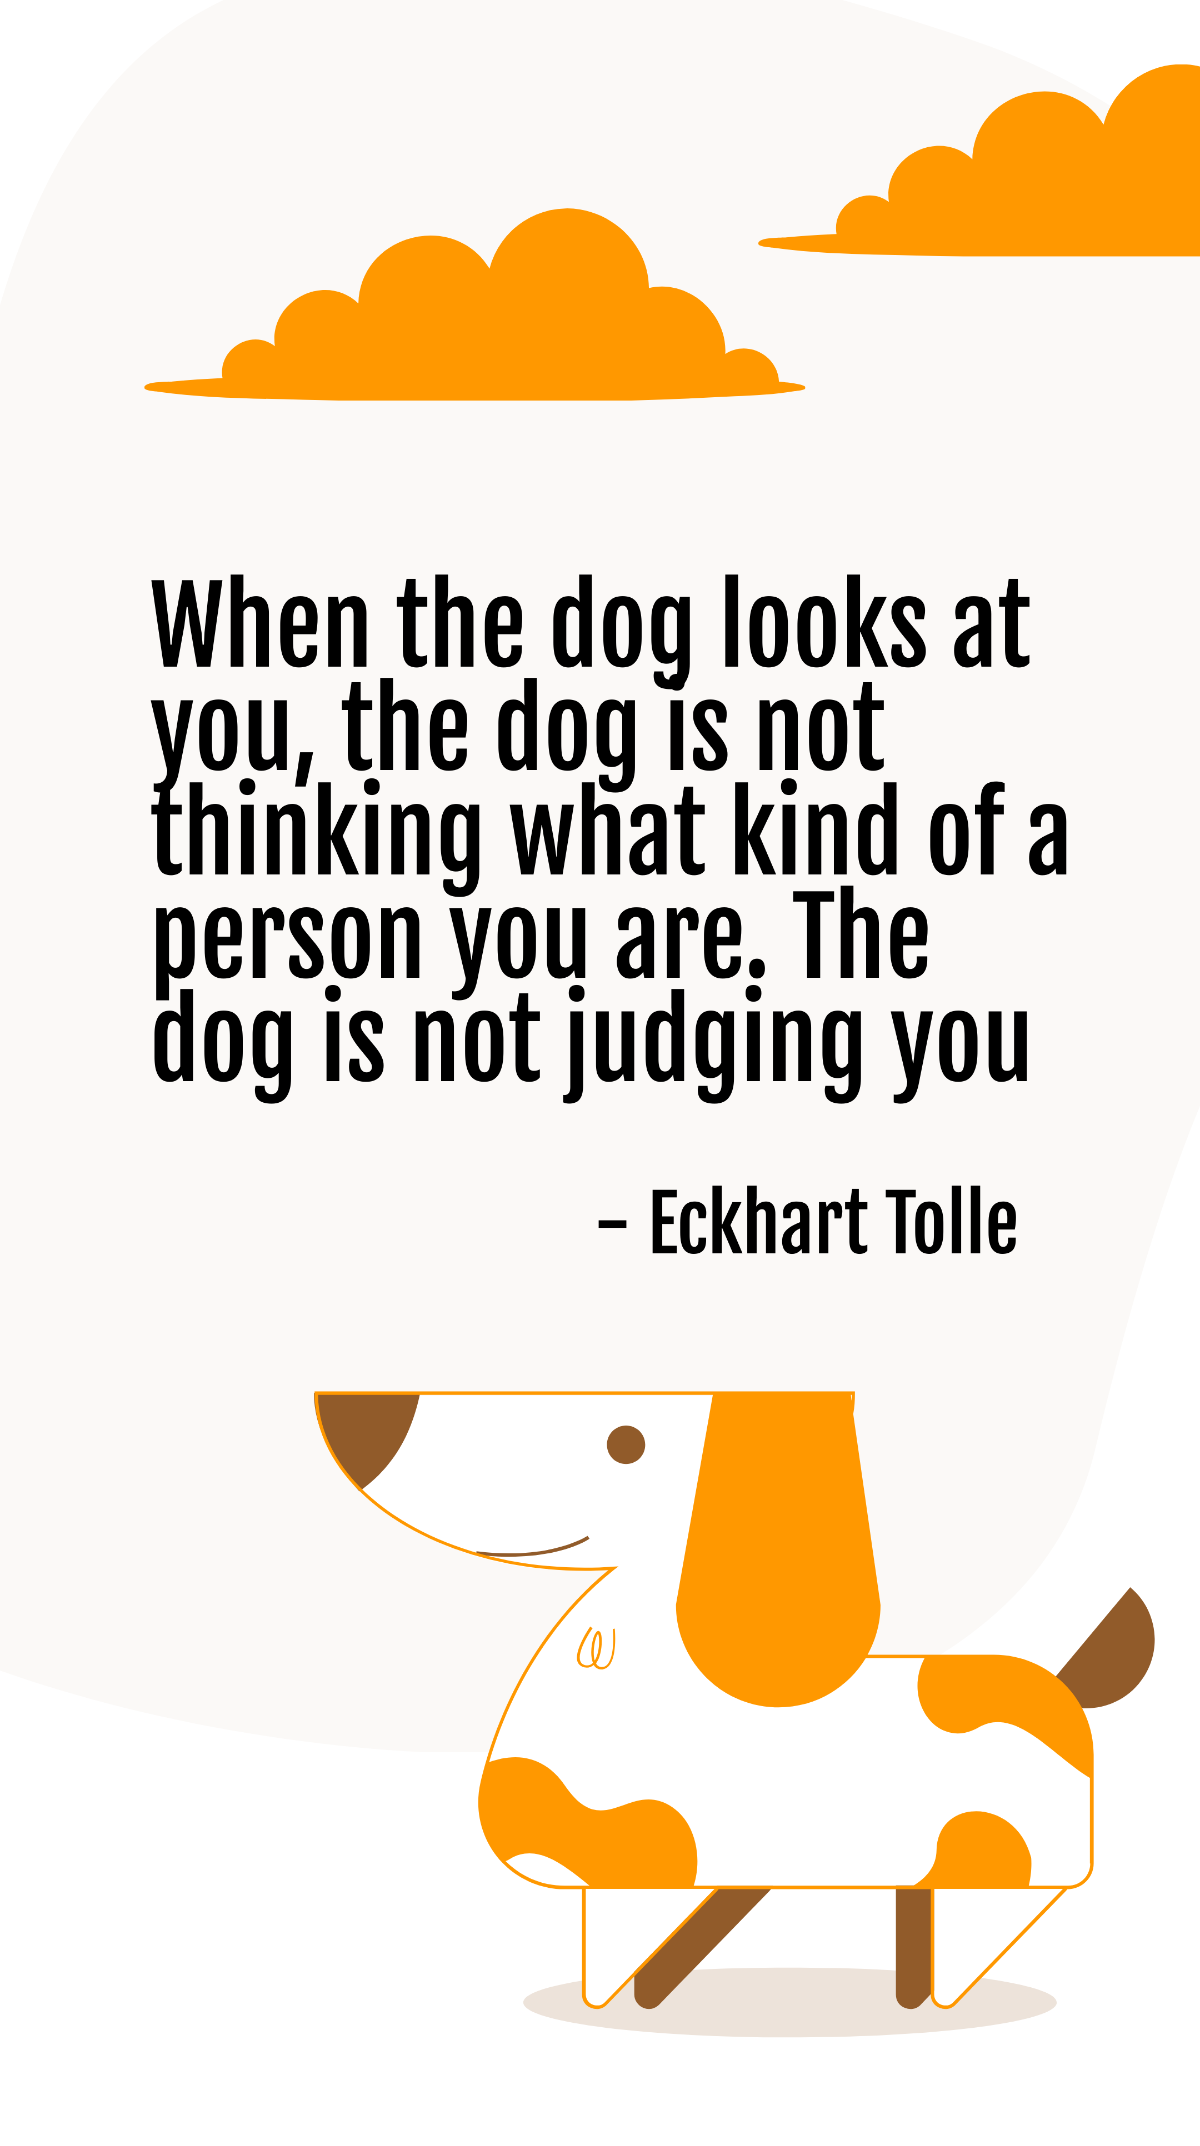 Eckhart Tolle - When the dog looks at you, the dog is not thinking what kind of a person you are. The dog is not judging you Template